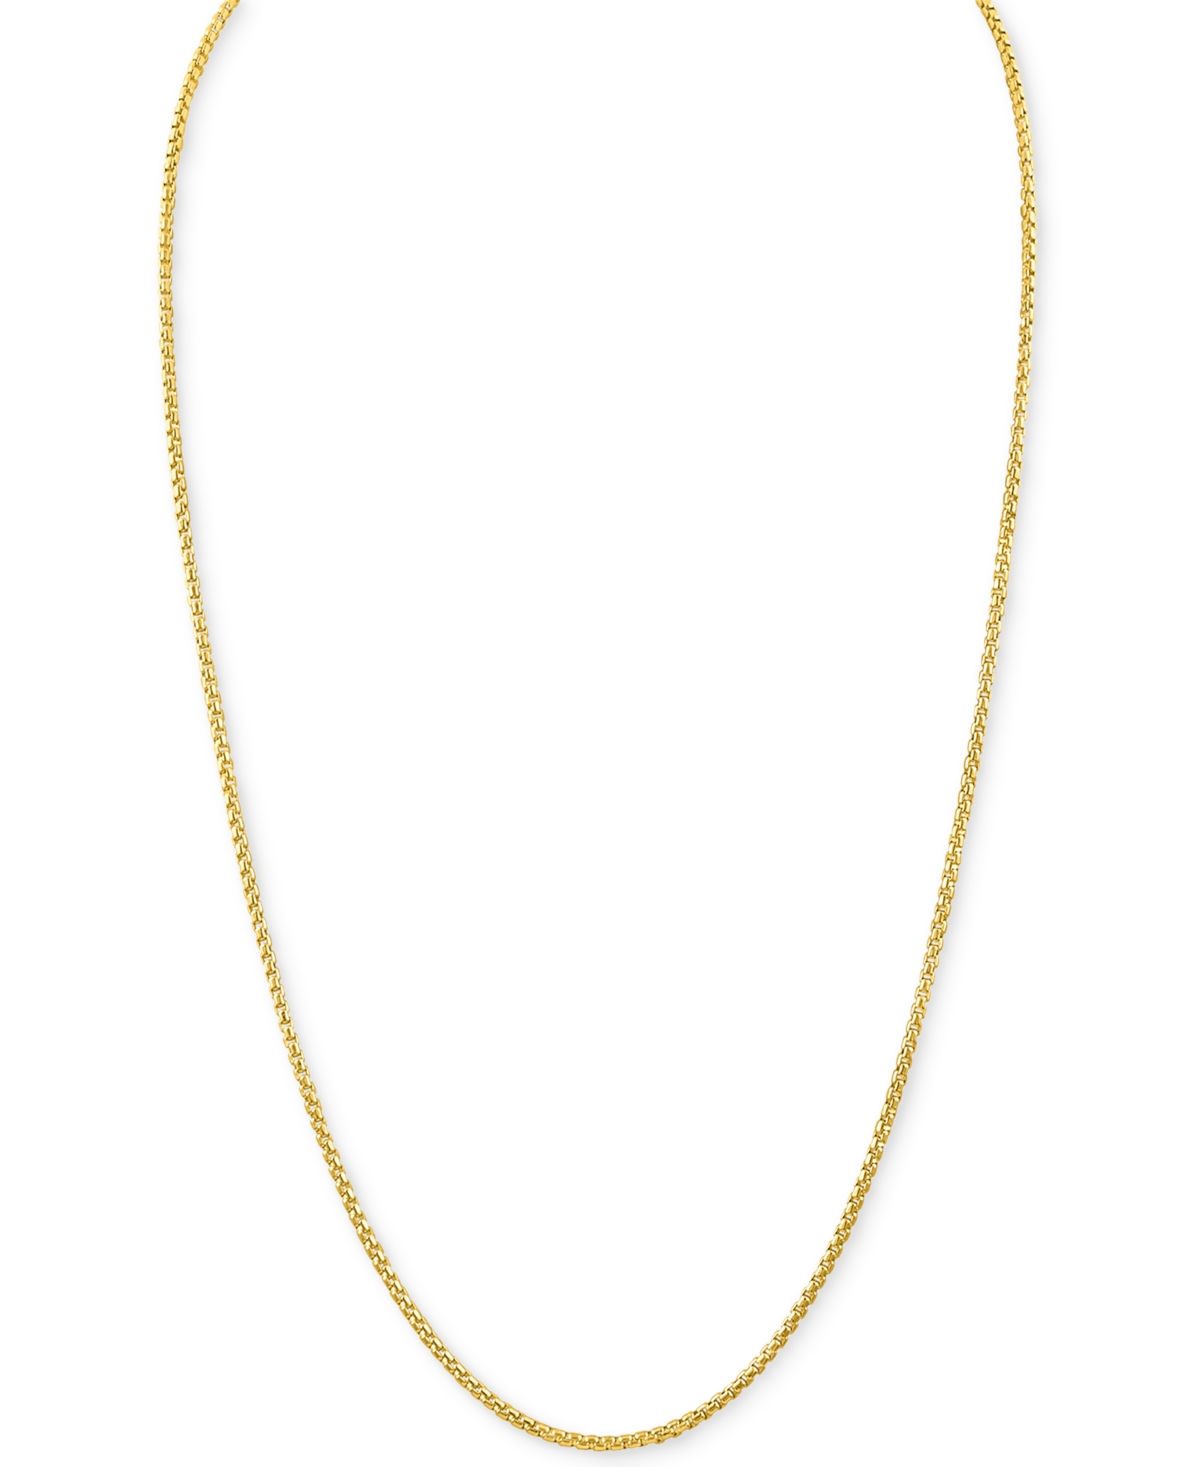 Box Link 24" Chain Necklace, Created for Macy's - Silver